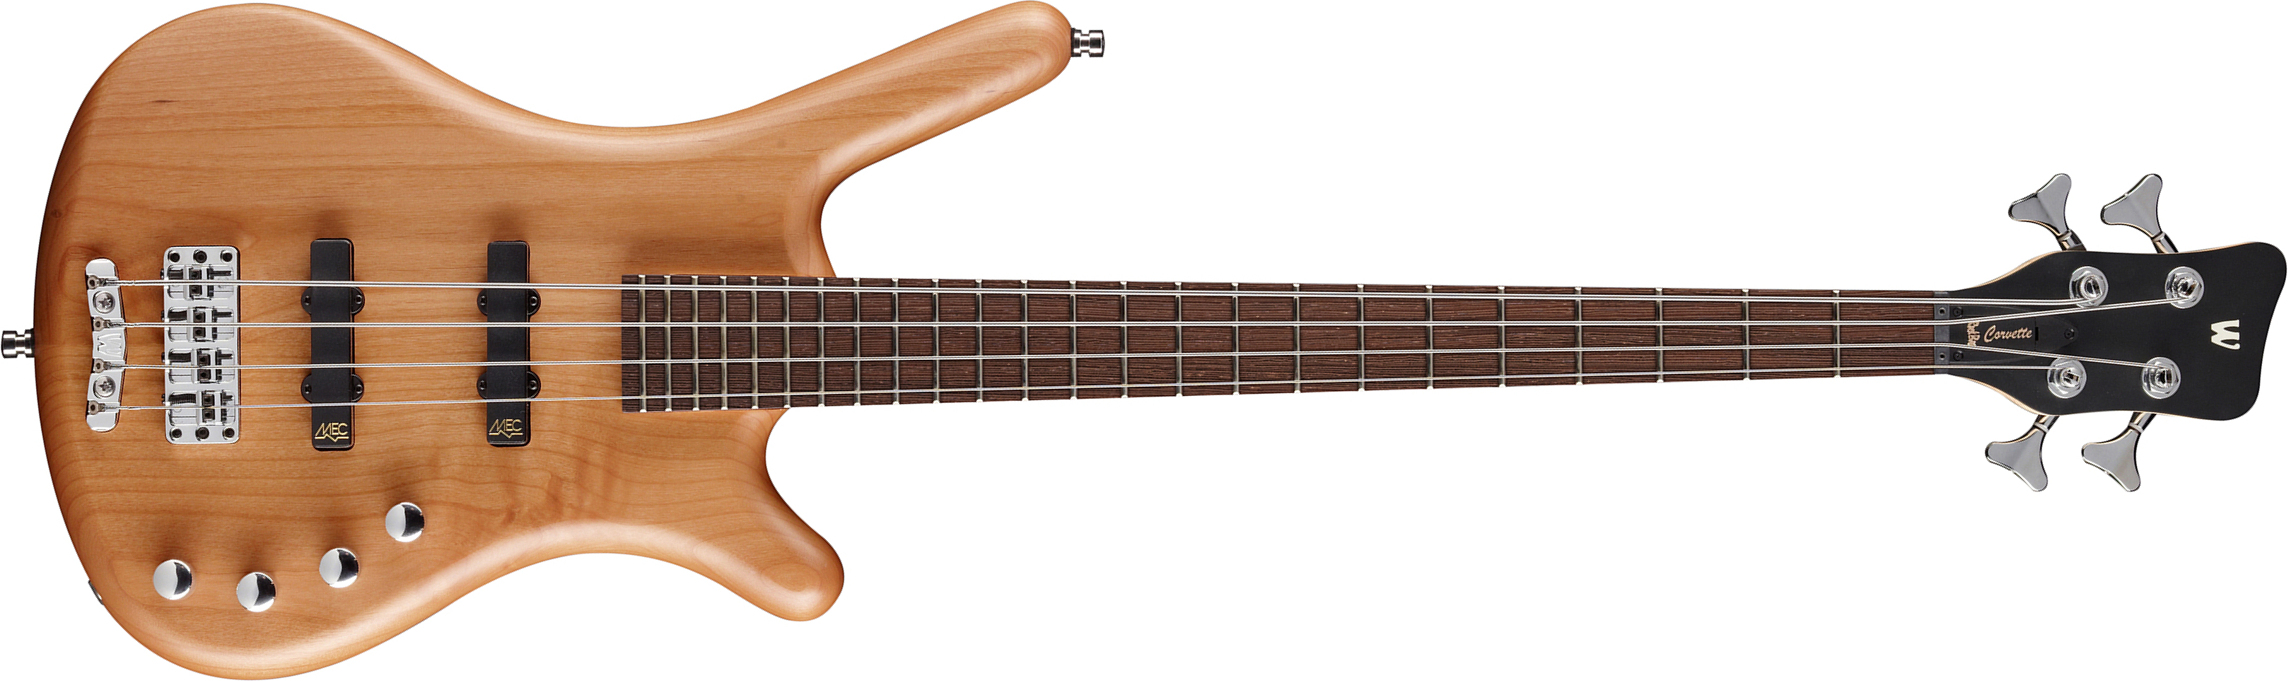 Warwick Corvette Basic 4 String Rockbass Active Wen - Natural Satin - Solid body electric bass - Main picture